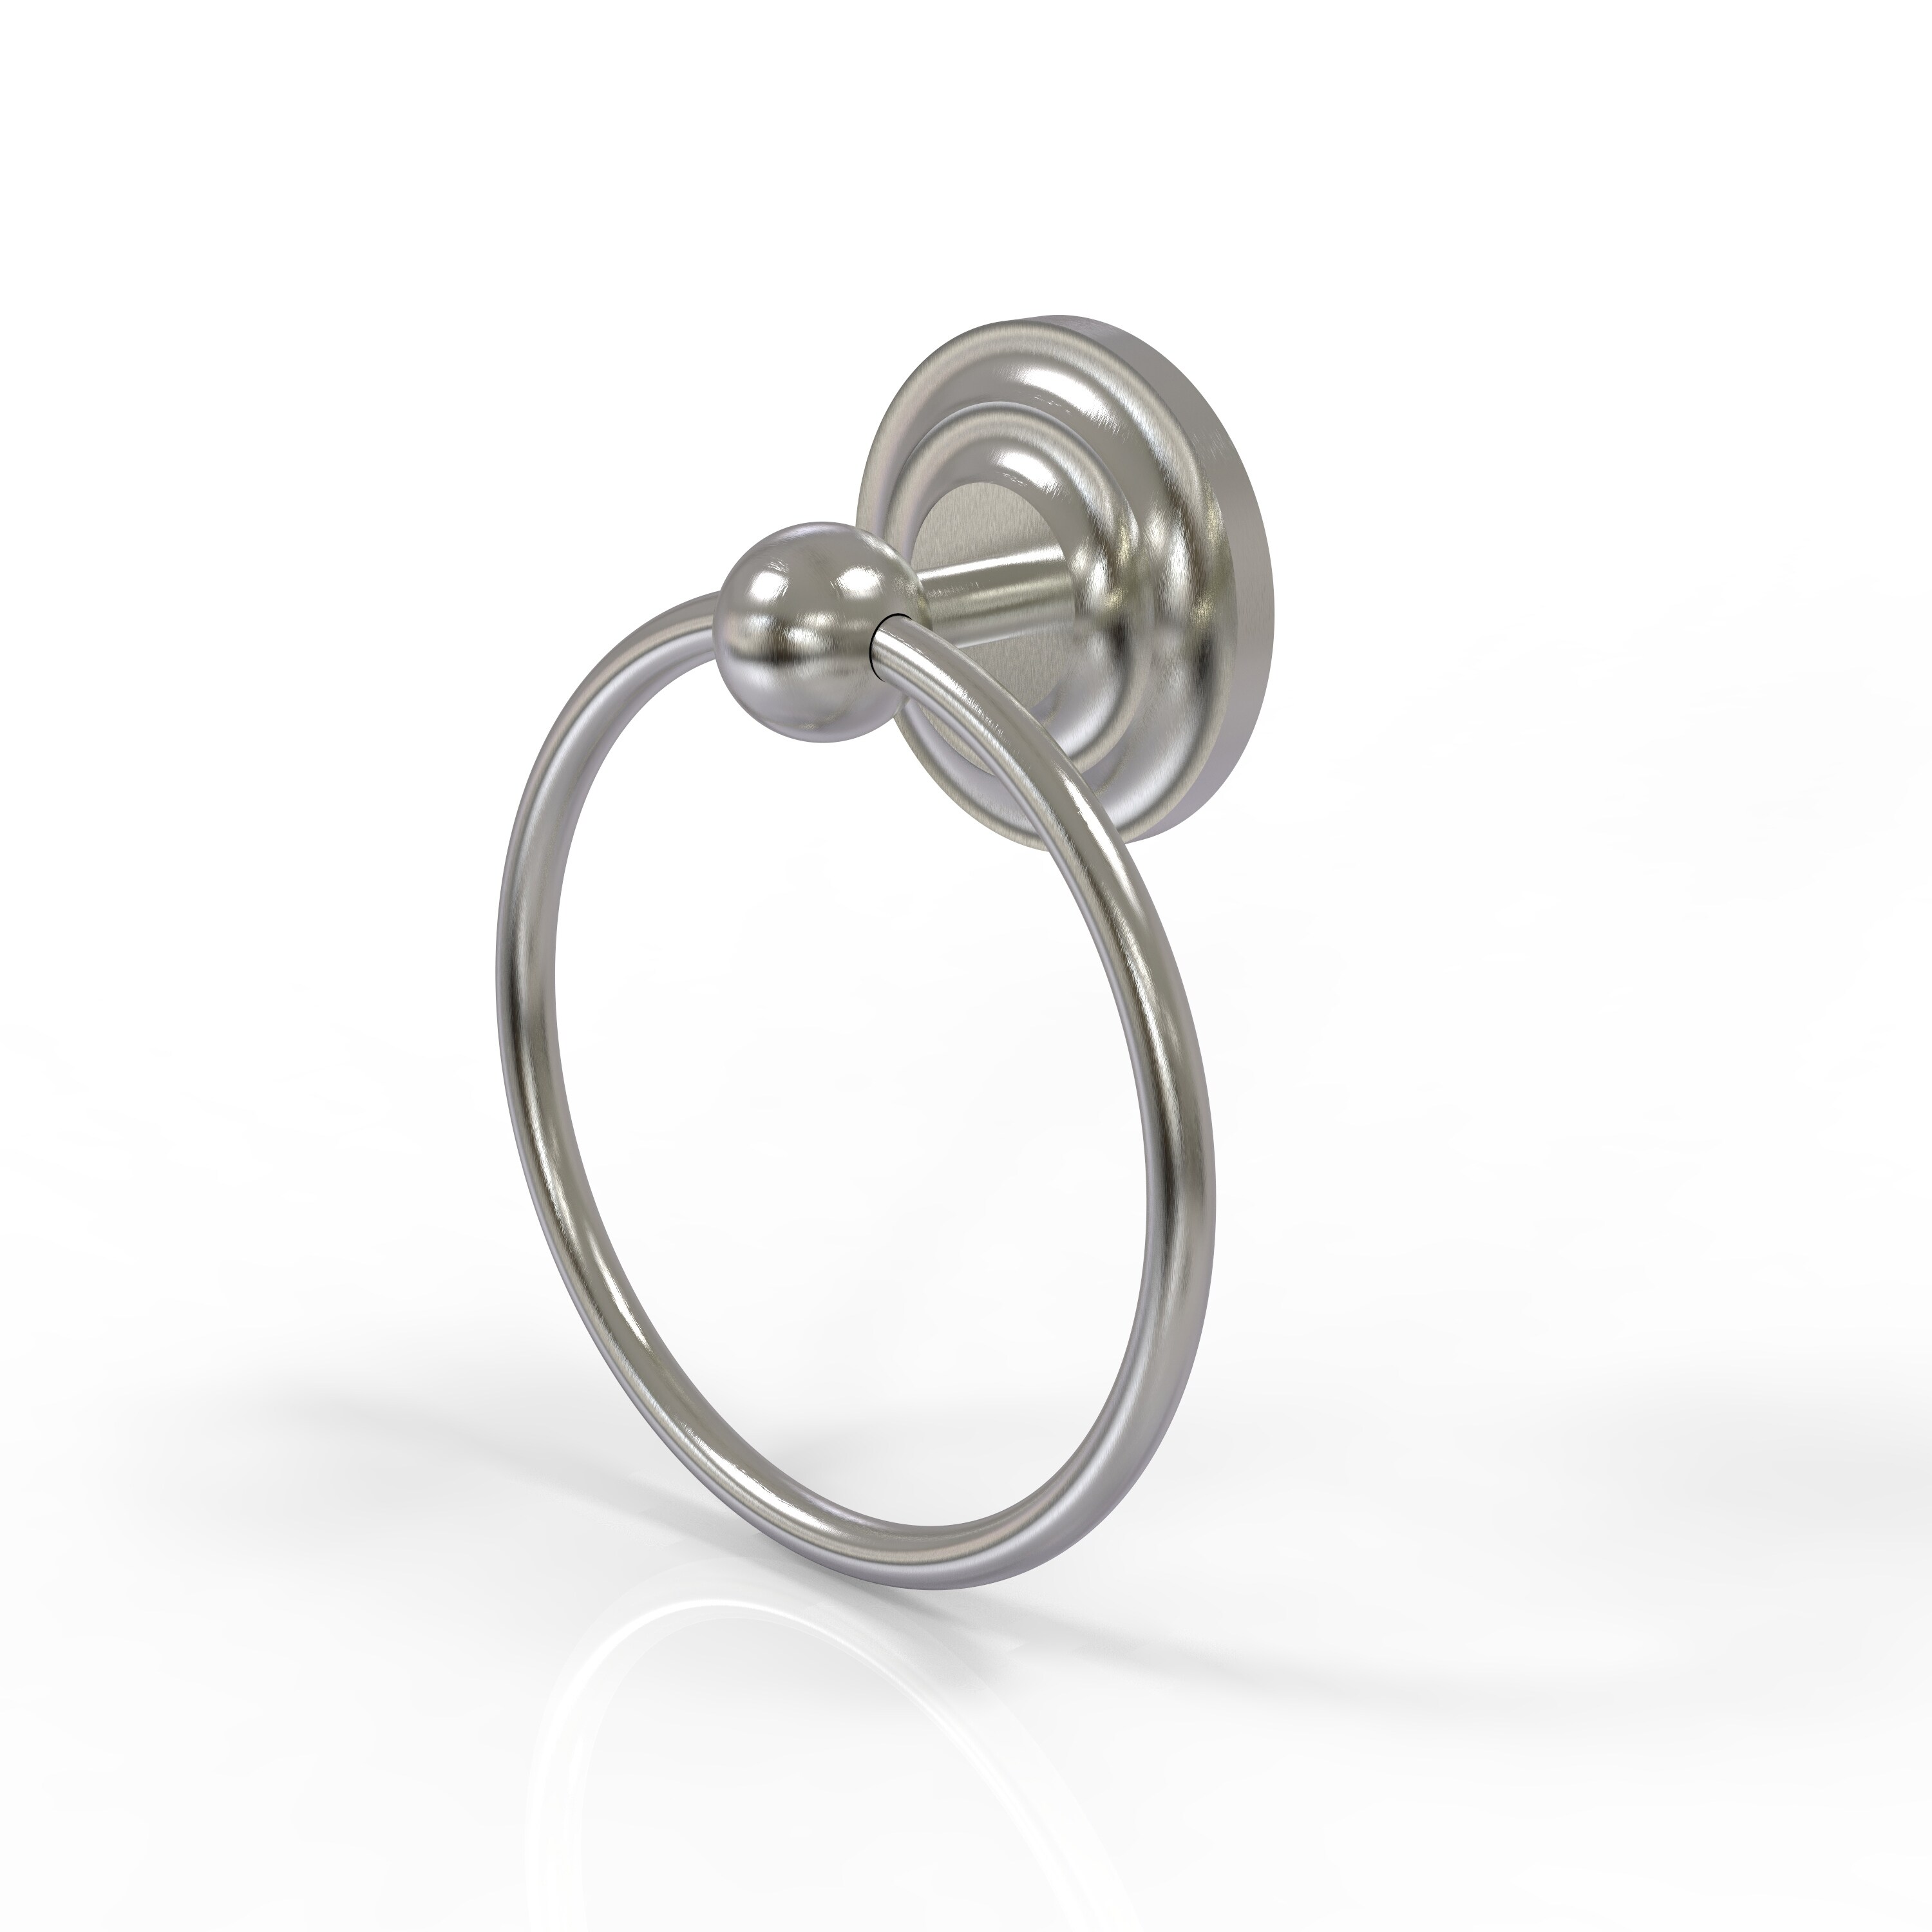 Allied Brass Que New Collection Towel Ring